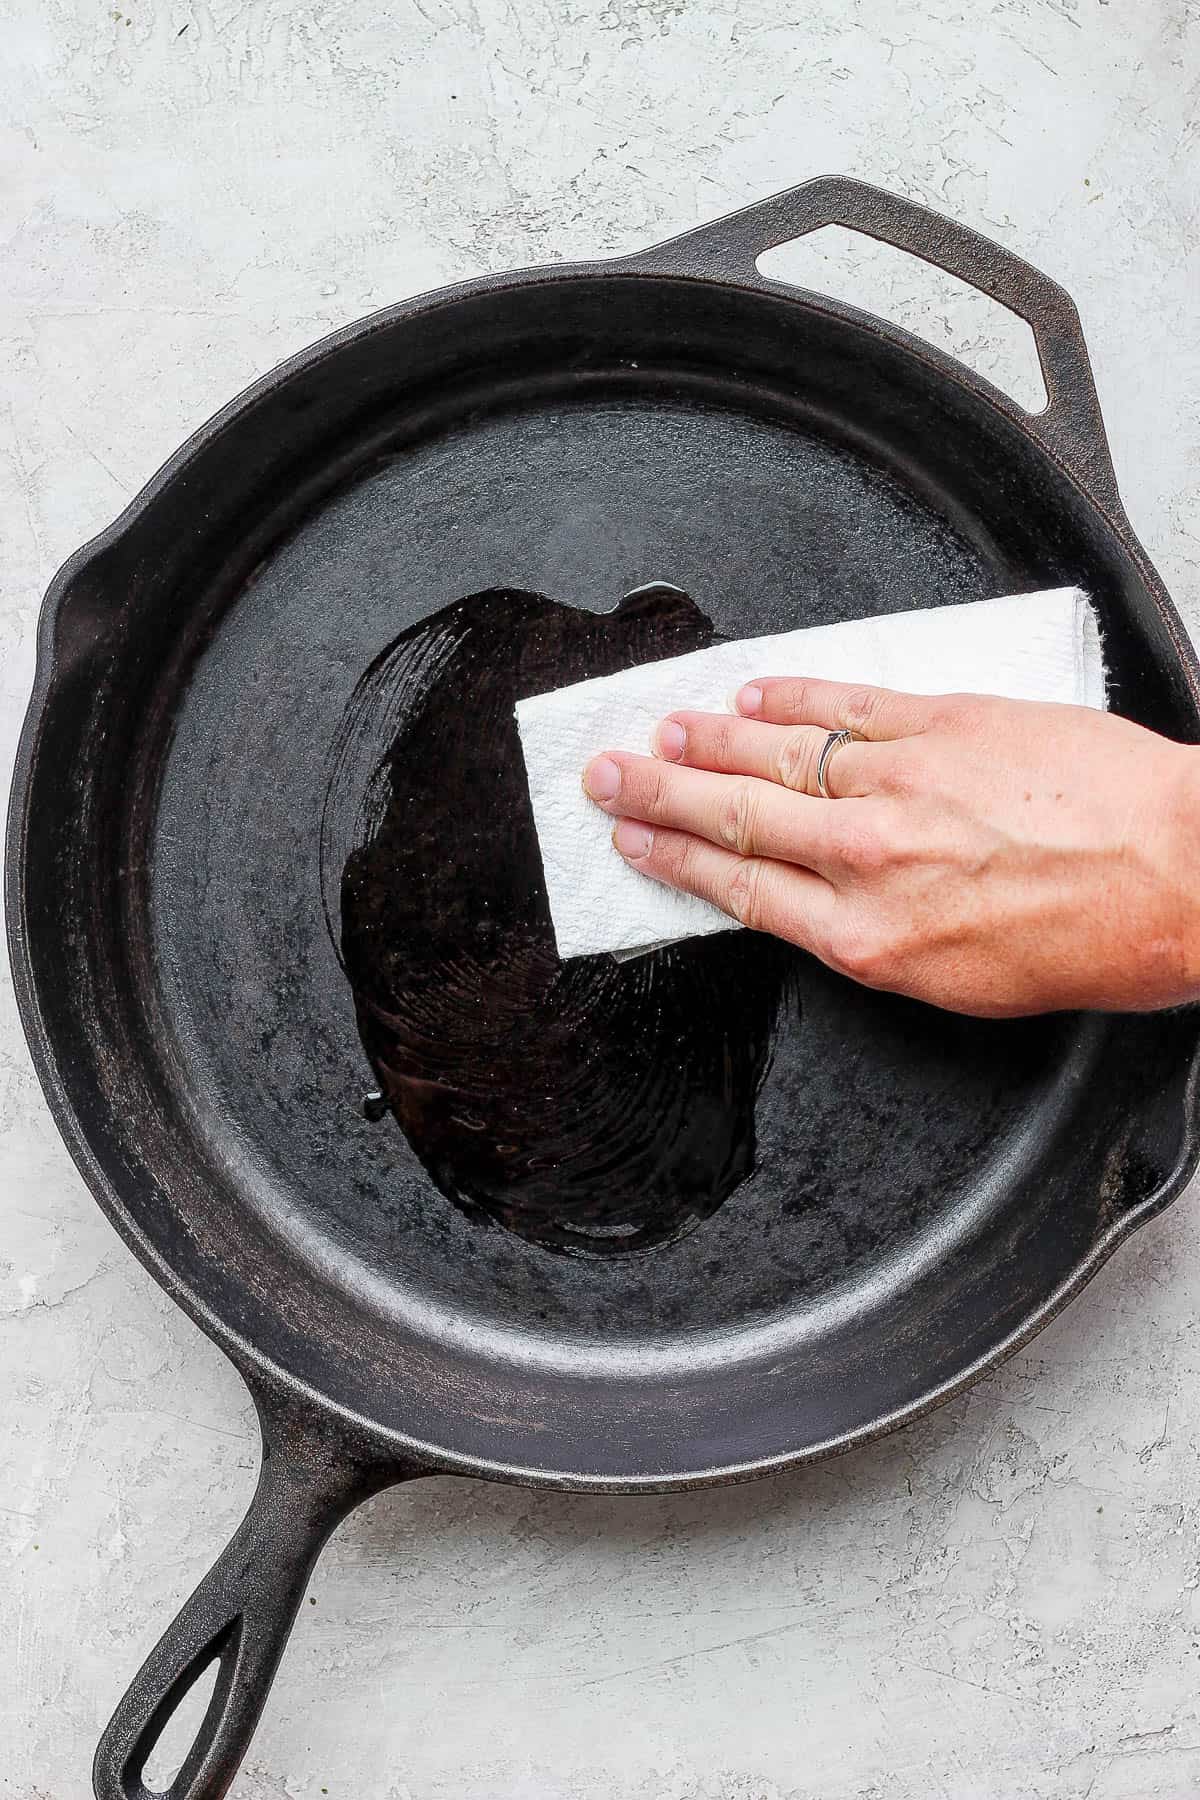 https://feelgoodfoodie.net/wp-content/uploads/2022/10/Cast-Iron-Skillet-Guide-07.jpg